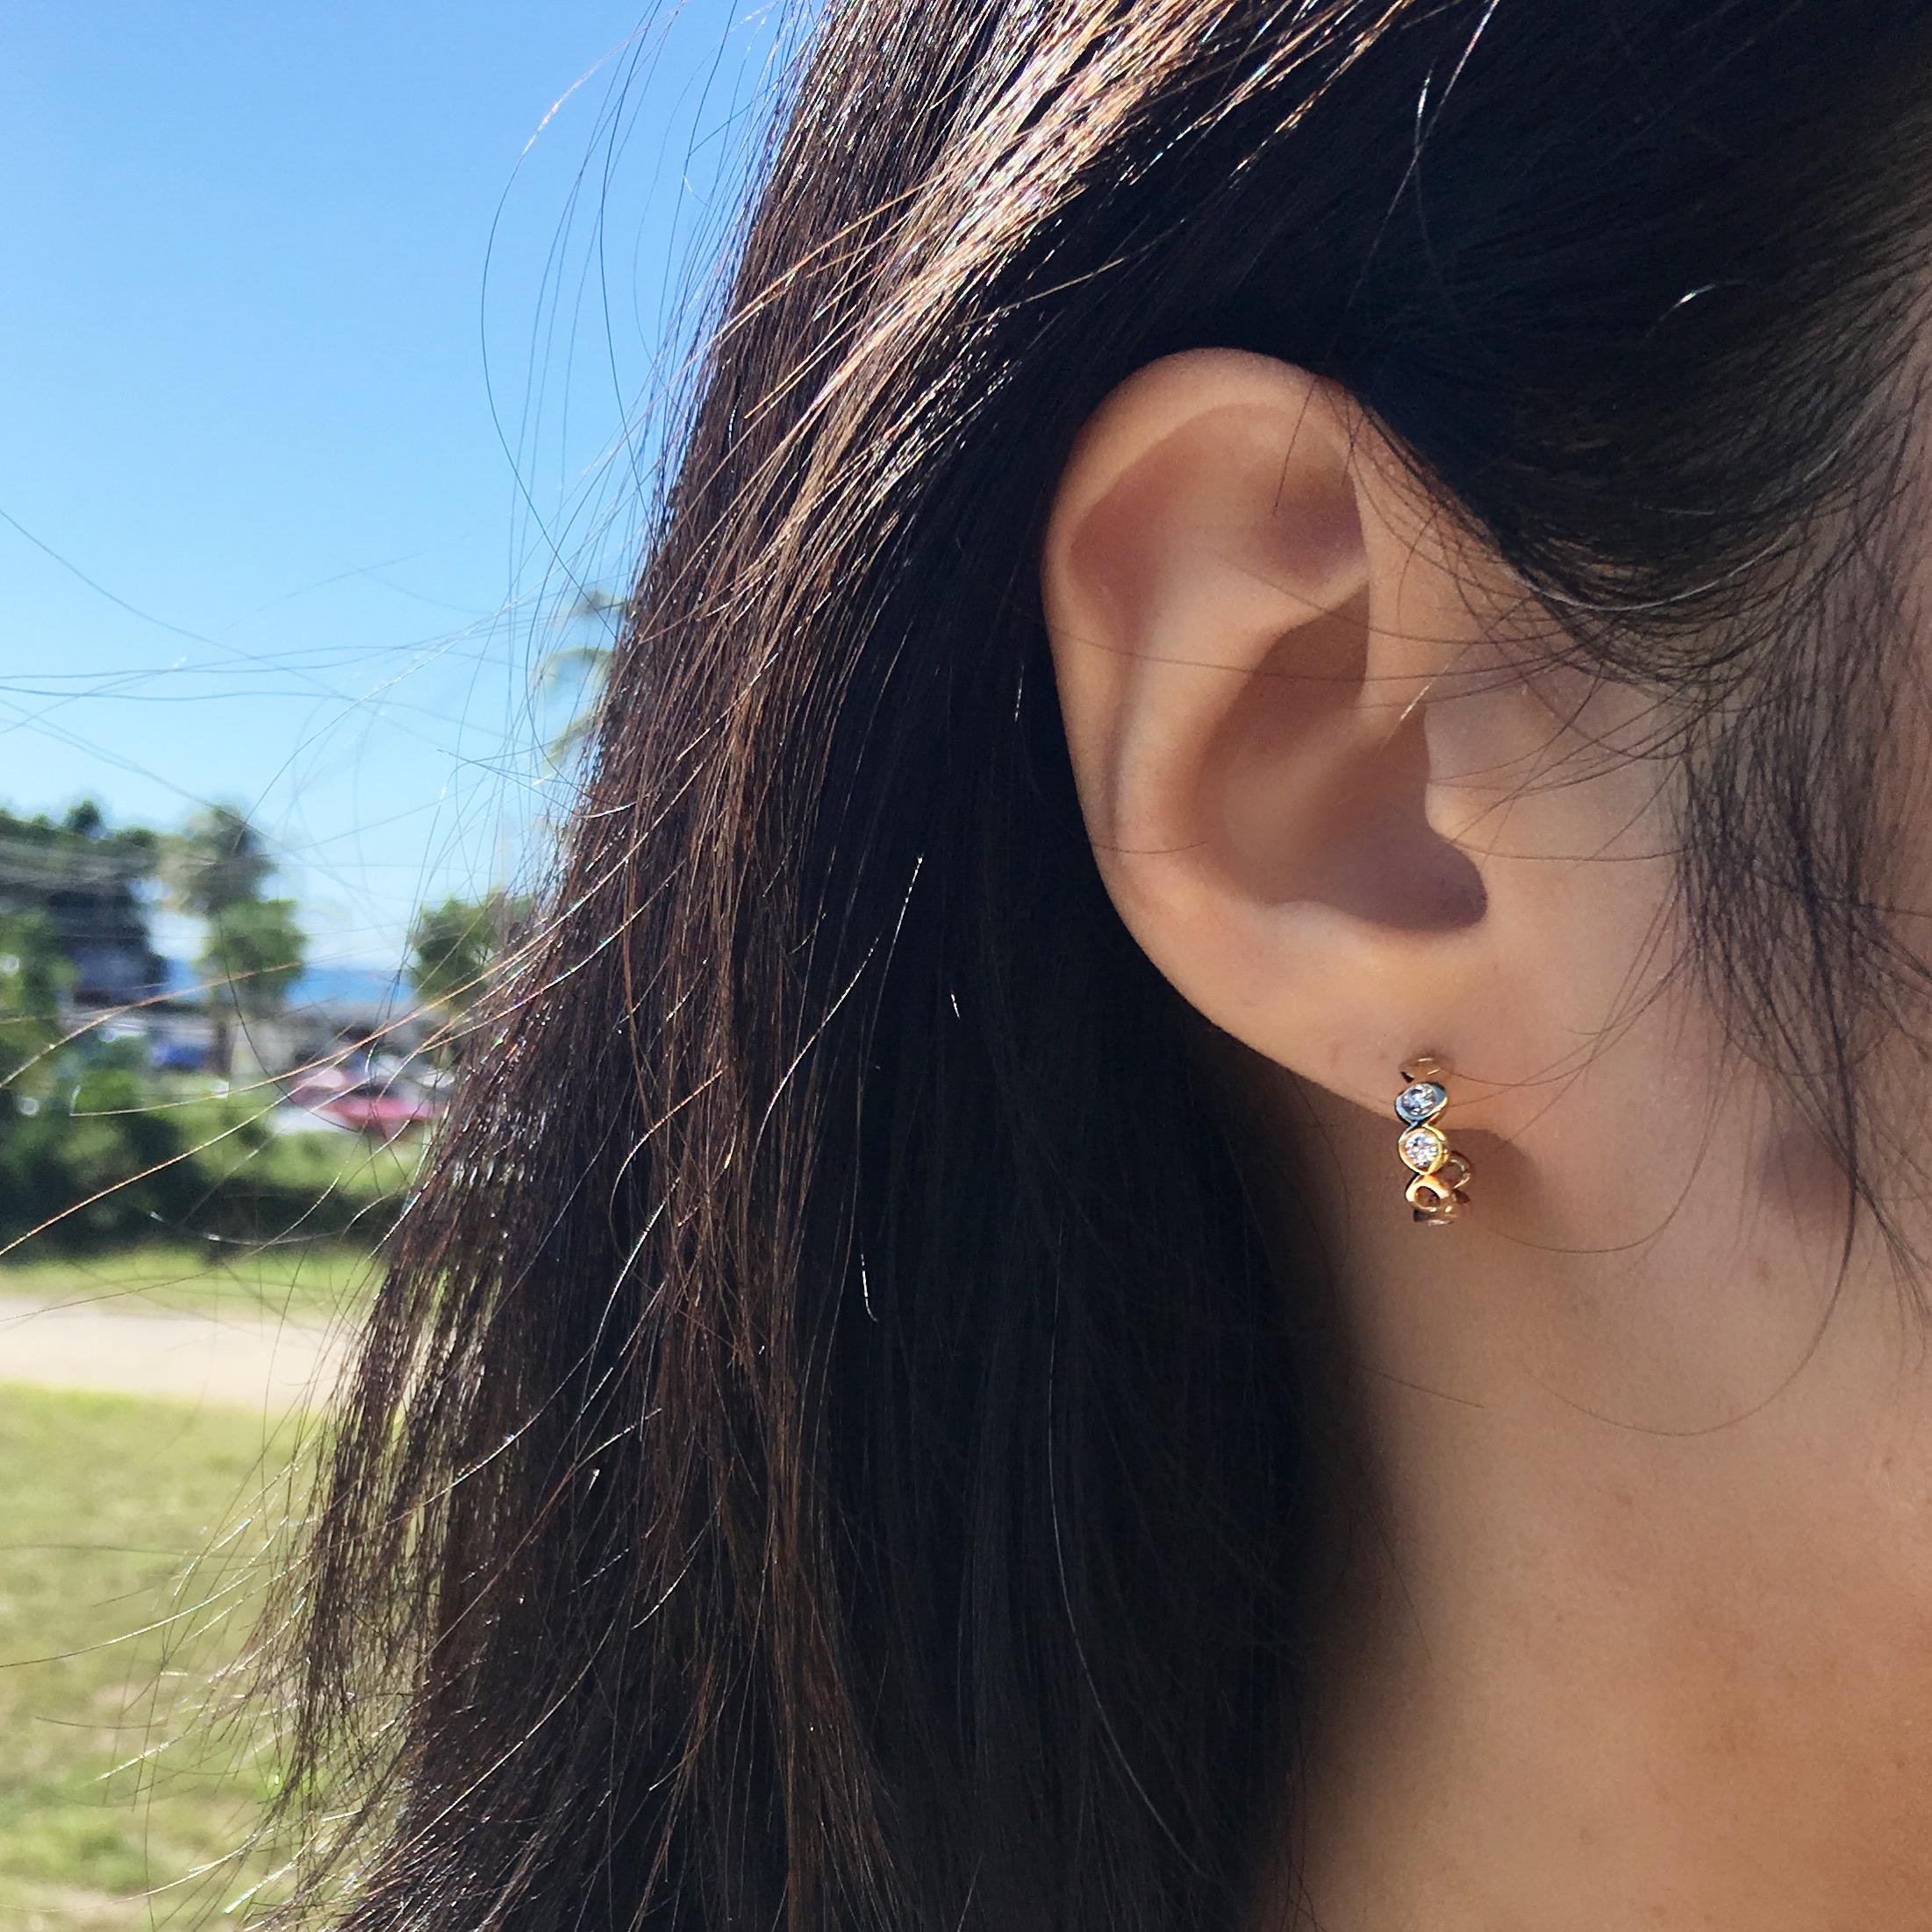 These pair of diamond small hoop earrings are easy-to-wear huggie hoops that can be worn everyday with your hair up or down.
Three pieces of diamonds are set into Hi June Parker's signature Organic circular elements on each huggie, just enough to